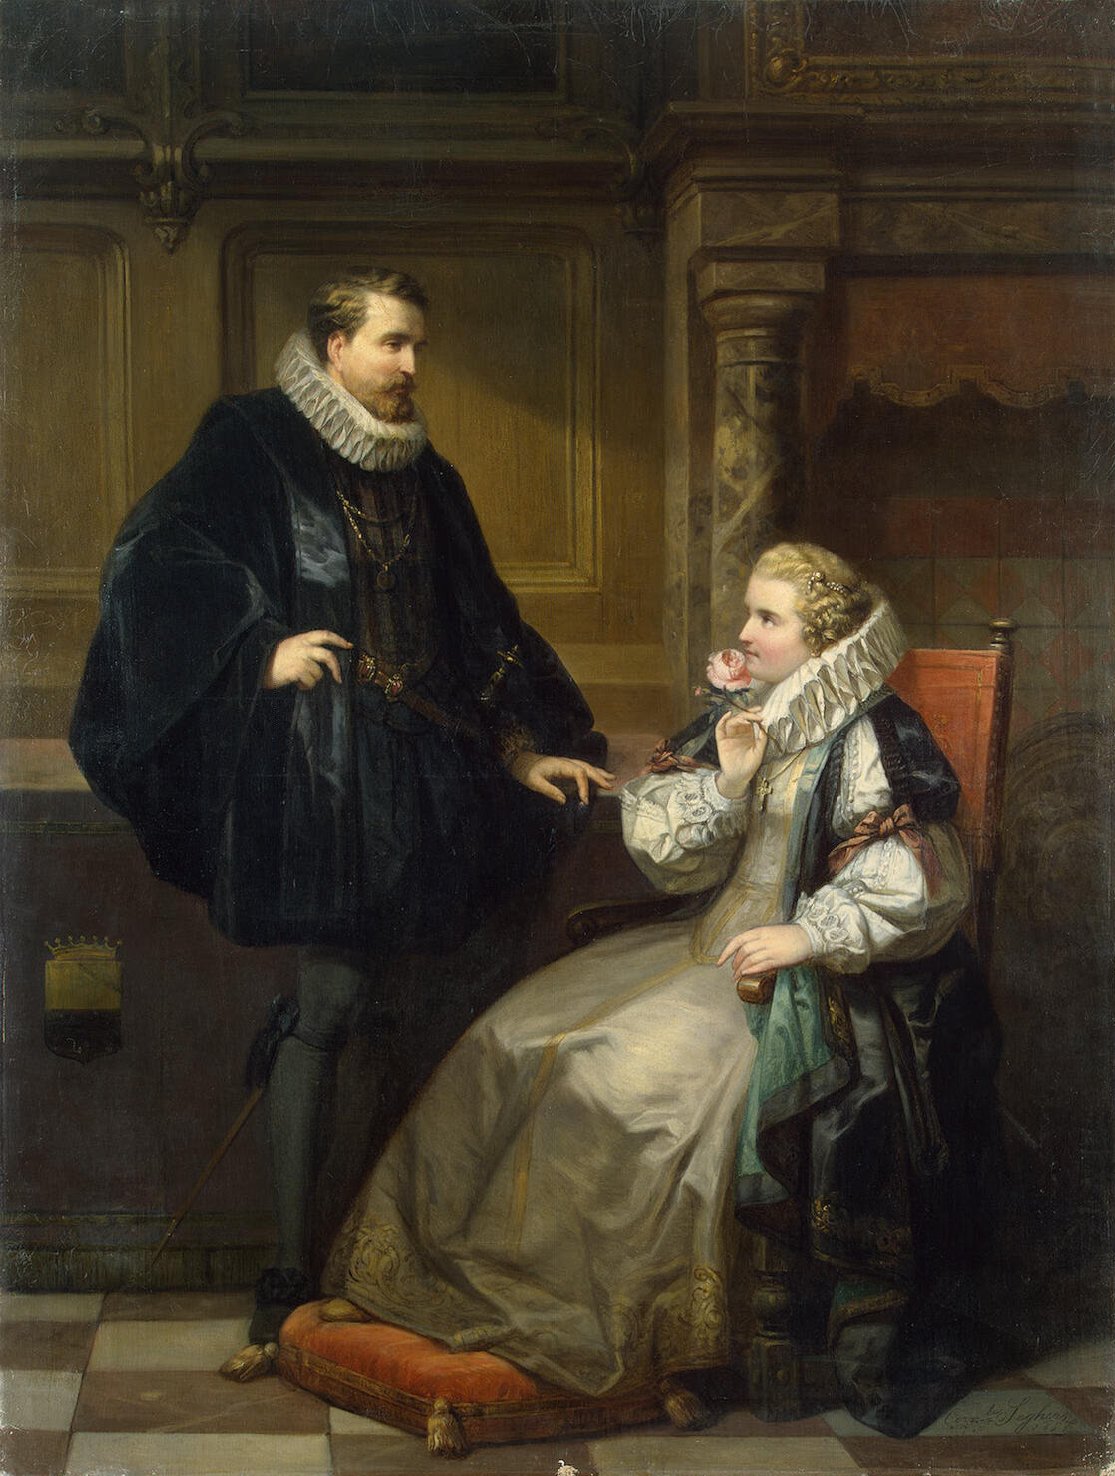 Lady And Gentleman by Corneille Seghers, 1857